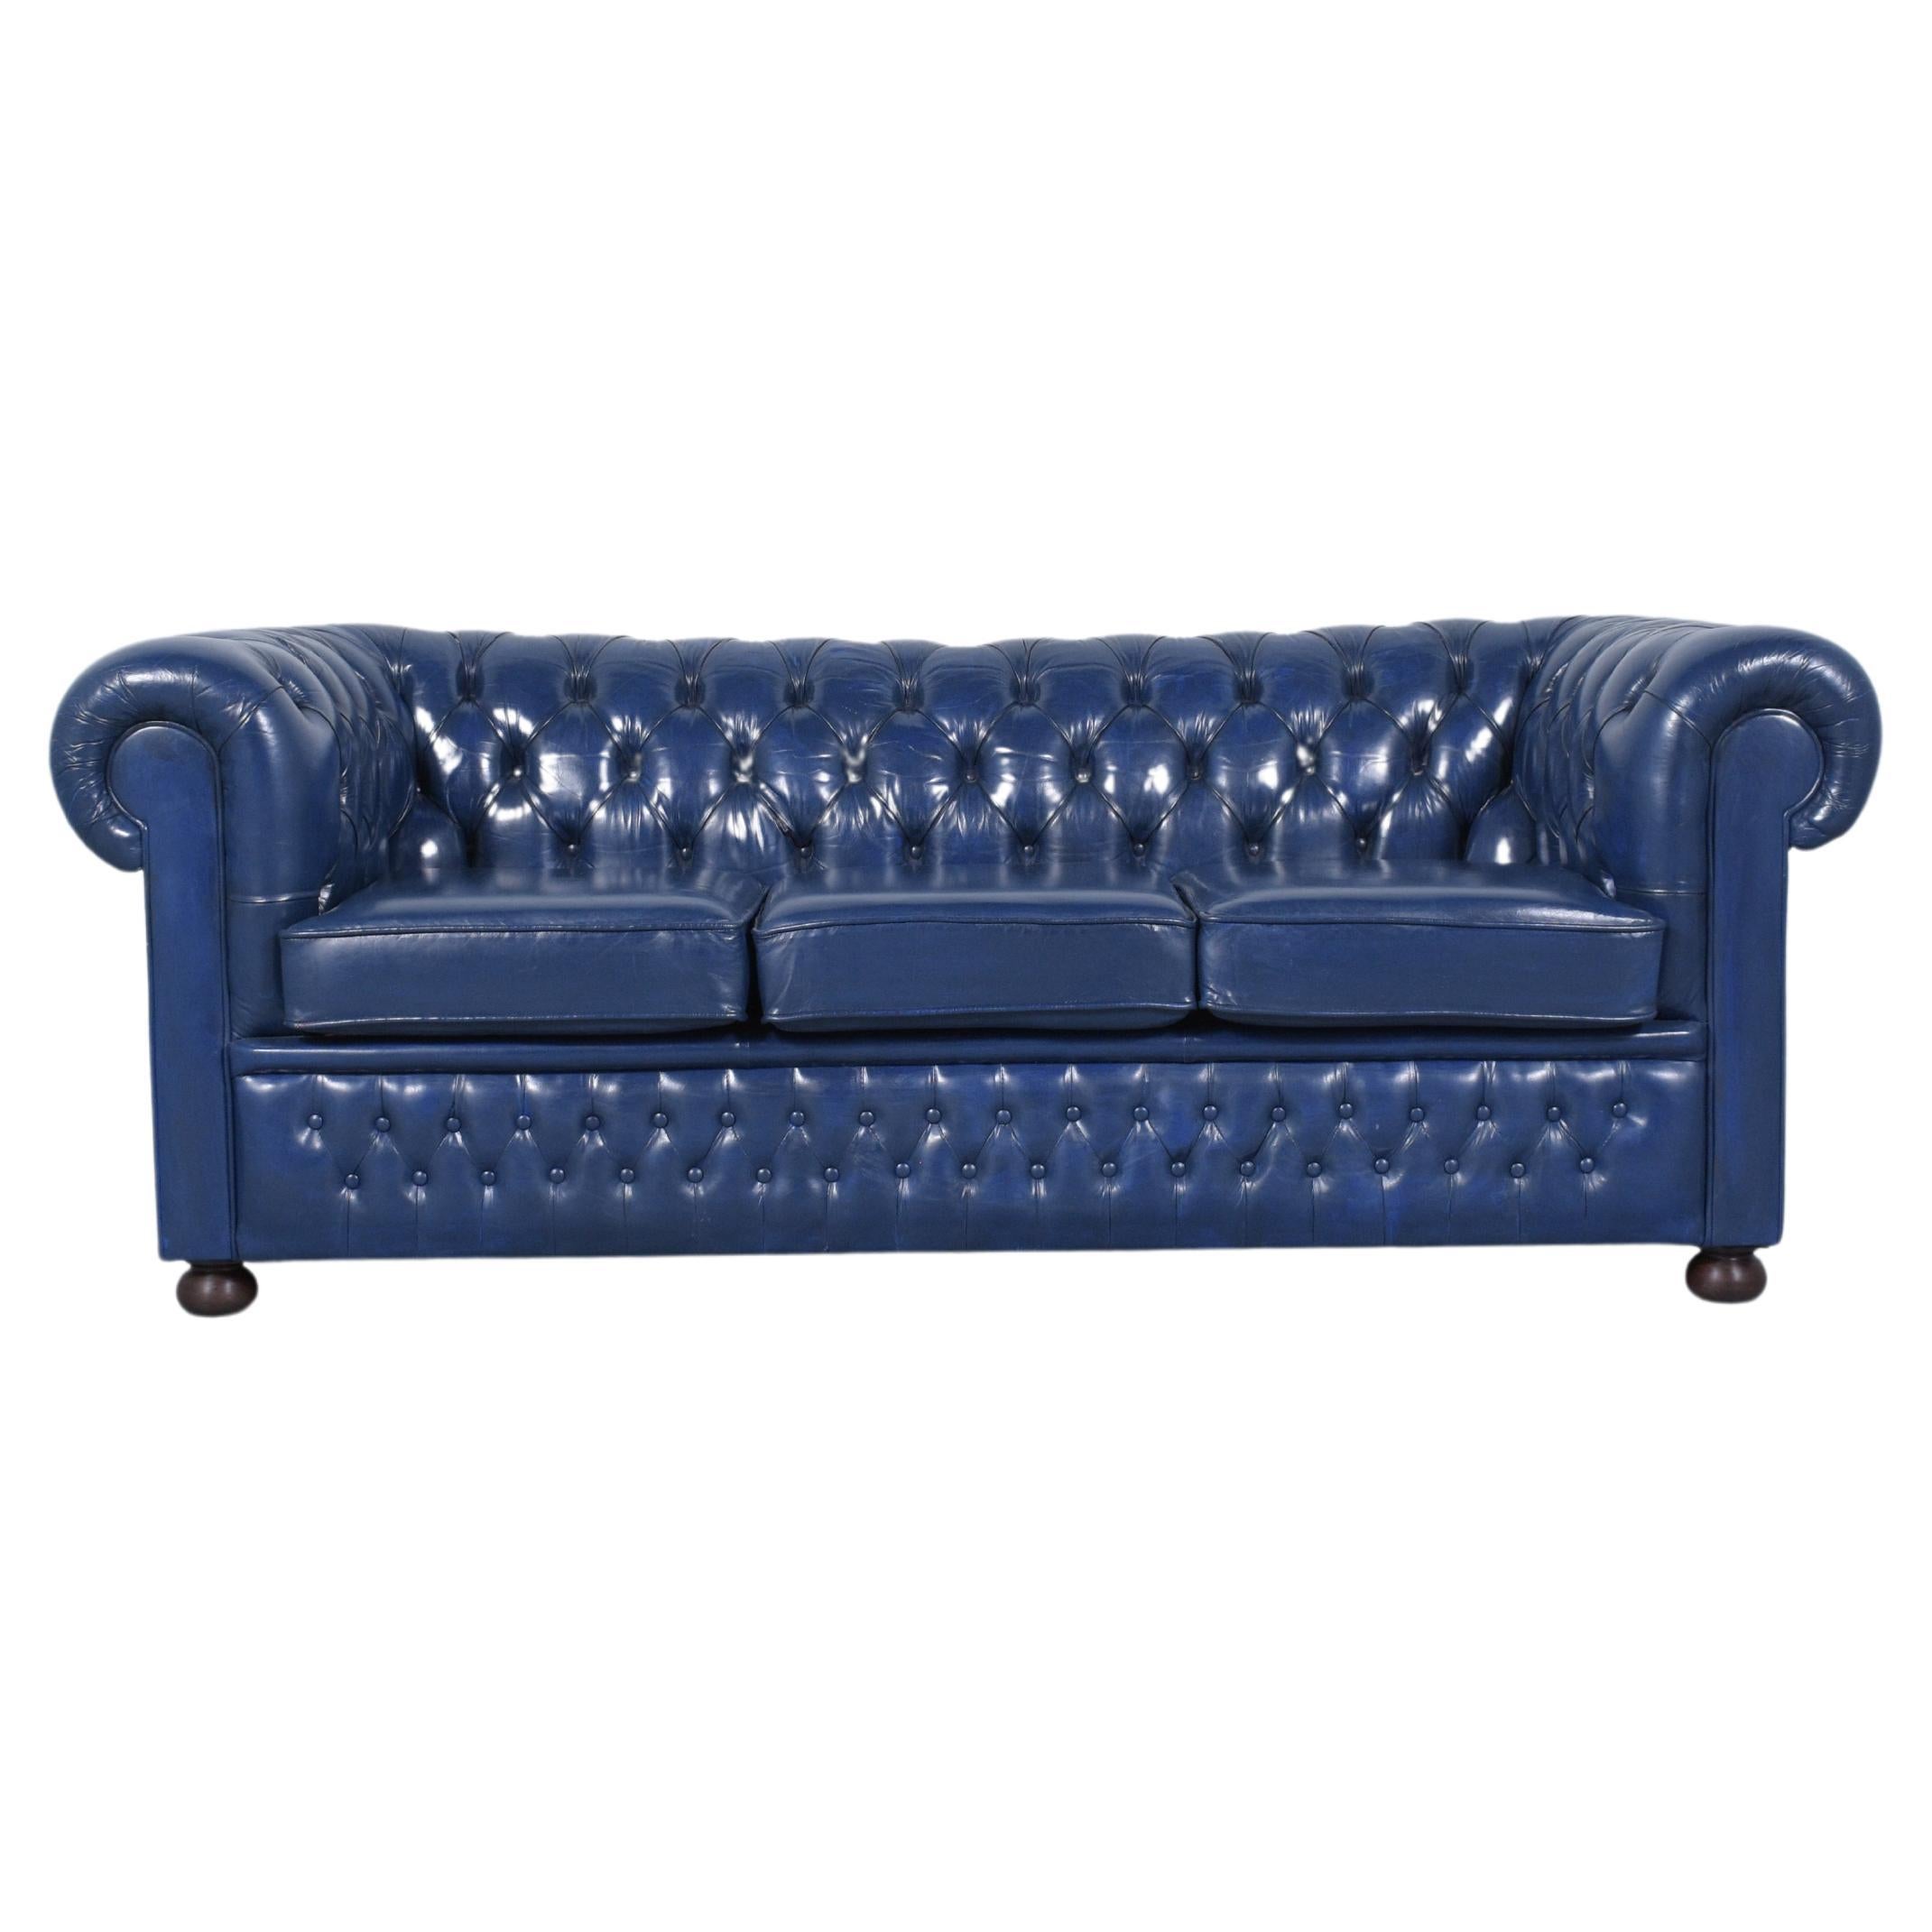 Embrace the timeless elegance of our restored vintage Chesterfield sofa, a classic embodiment of comfort and sophistication. Crafted in the 1970s and revitalized by our experienced craftsmen, this sofa features a solid wood frame and luxurious navy